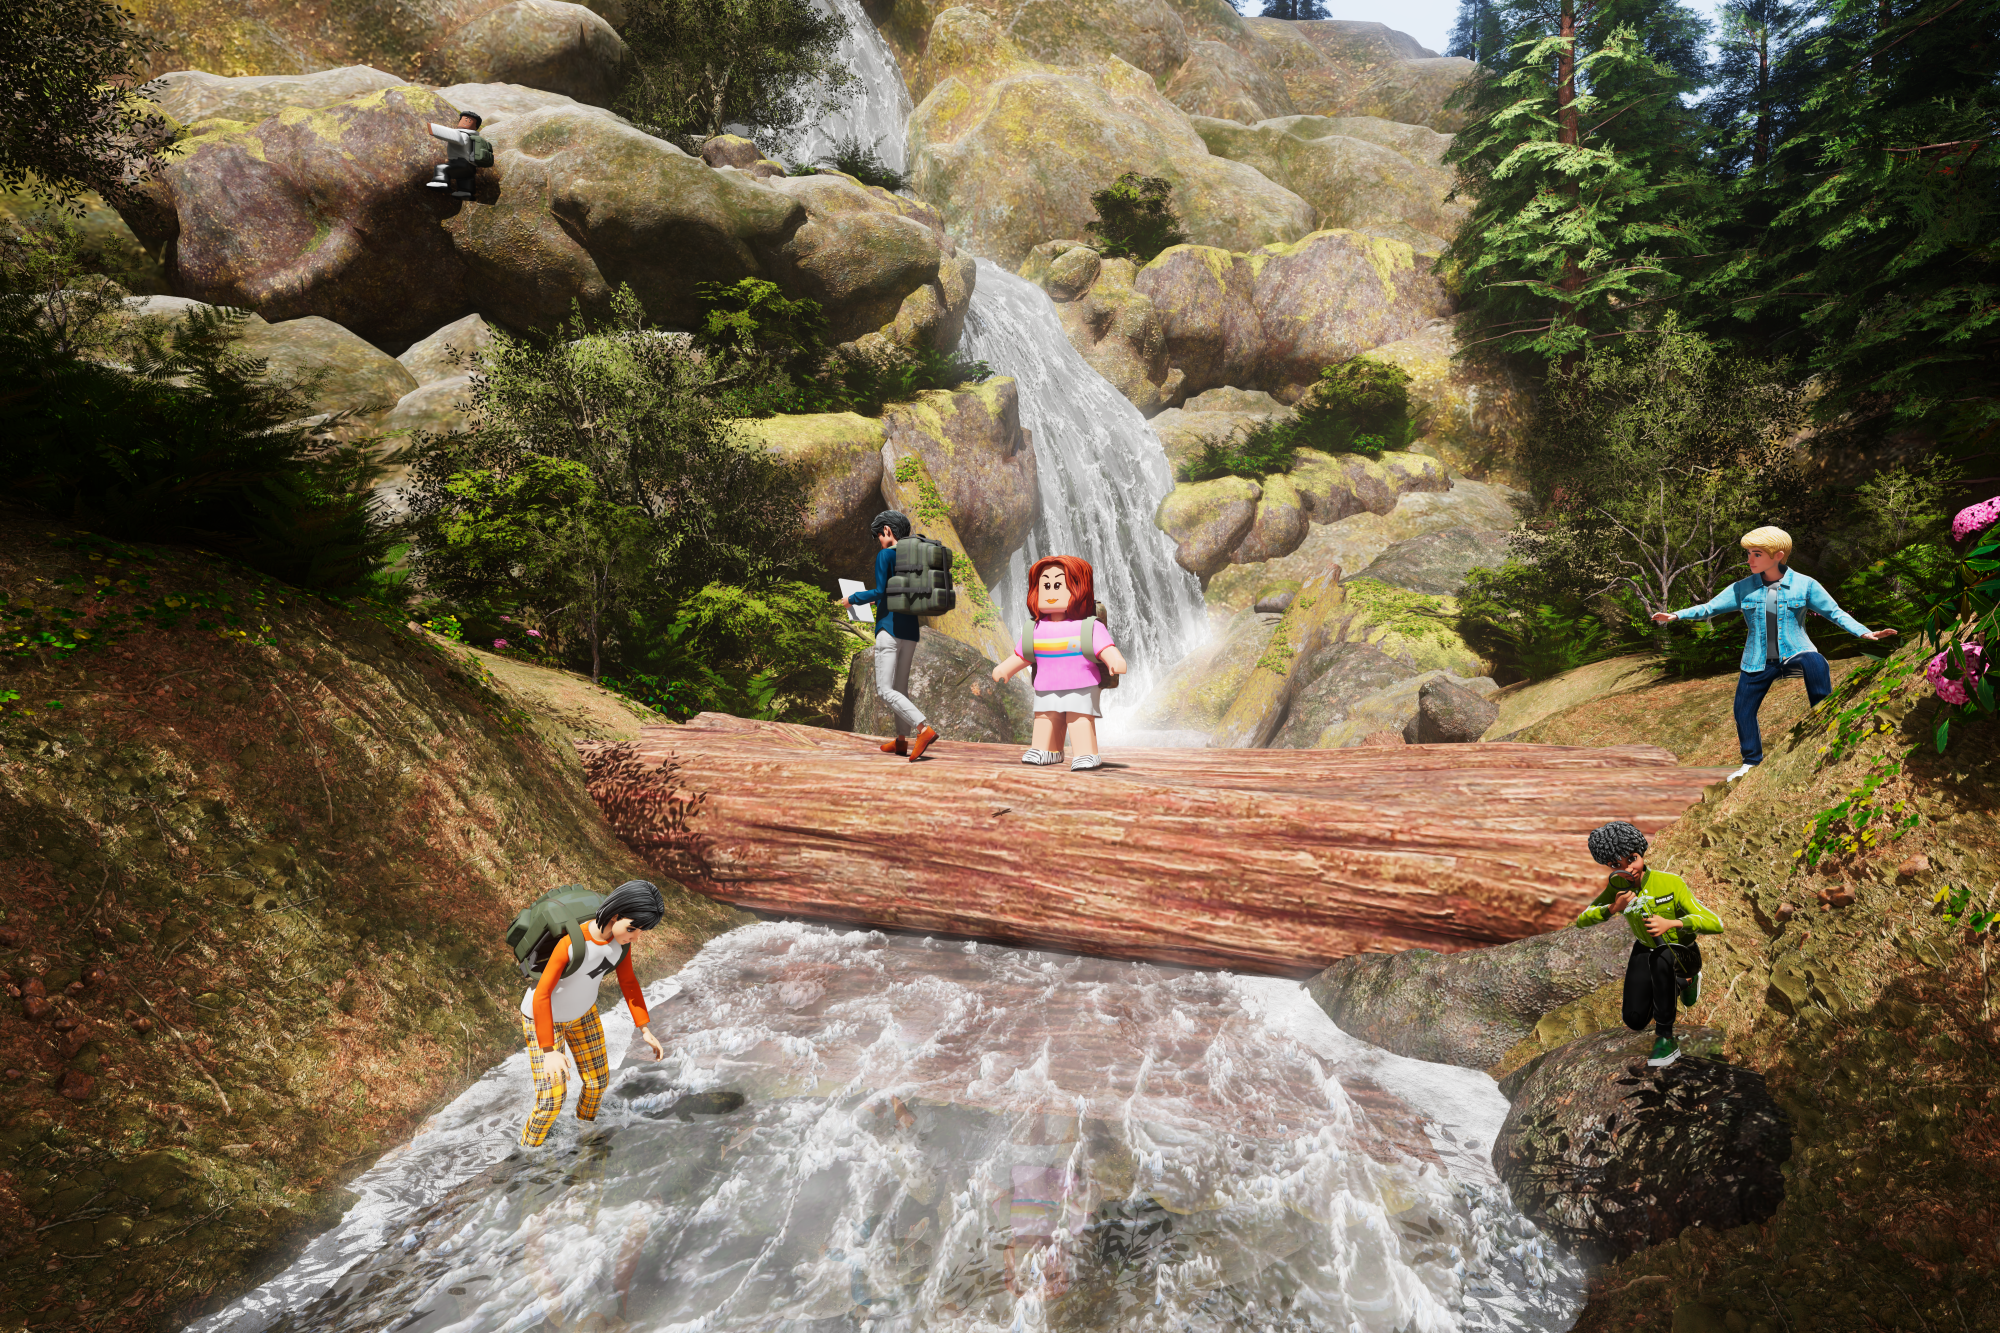 Roblox avatars in a forest